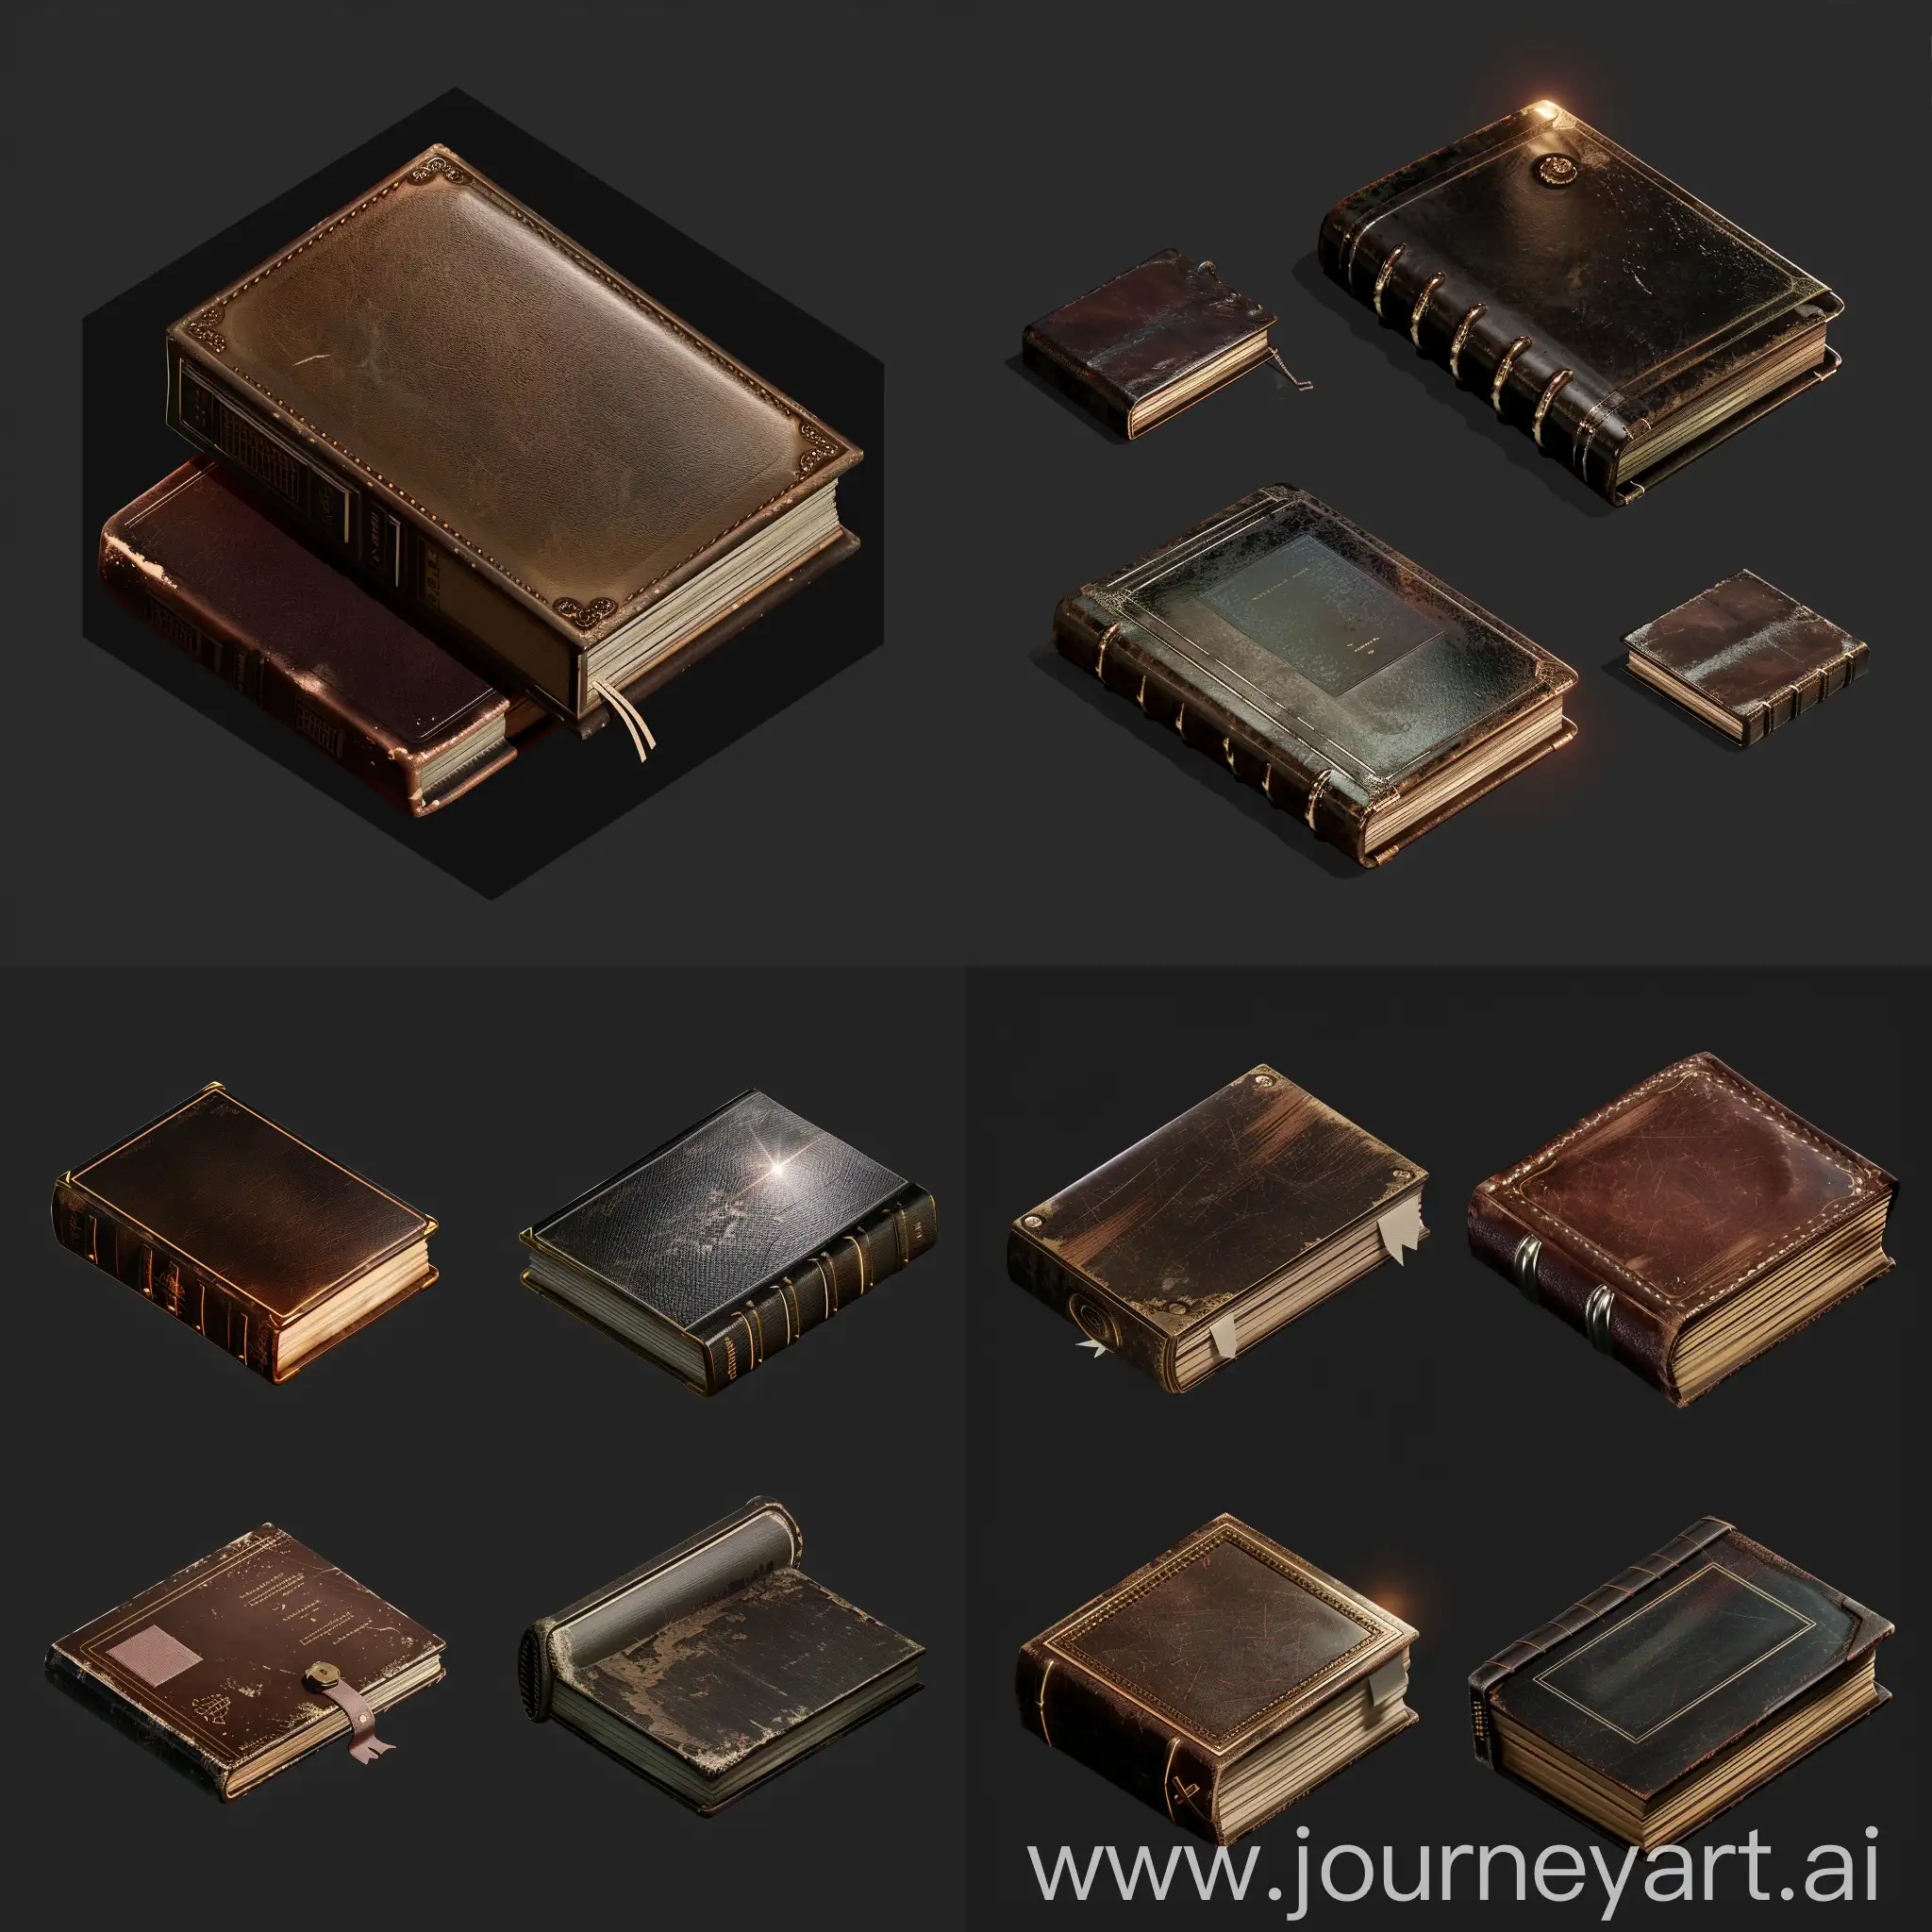 Isometric-Set-of-Old-Worn-Books-with-Leather-Covers